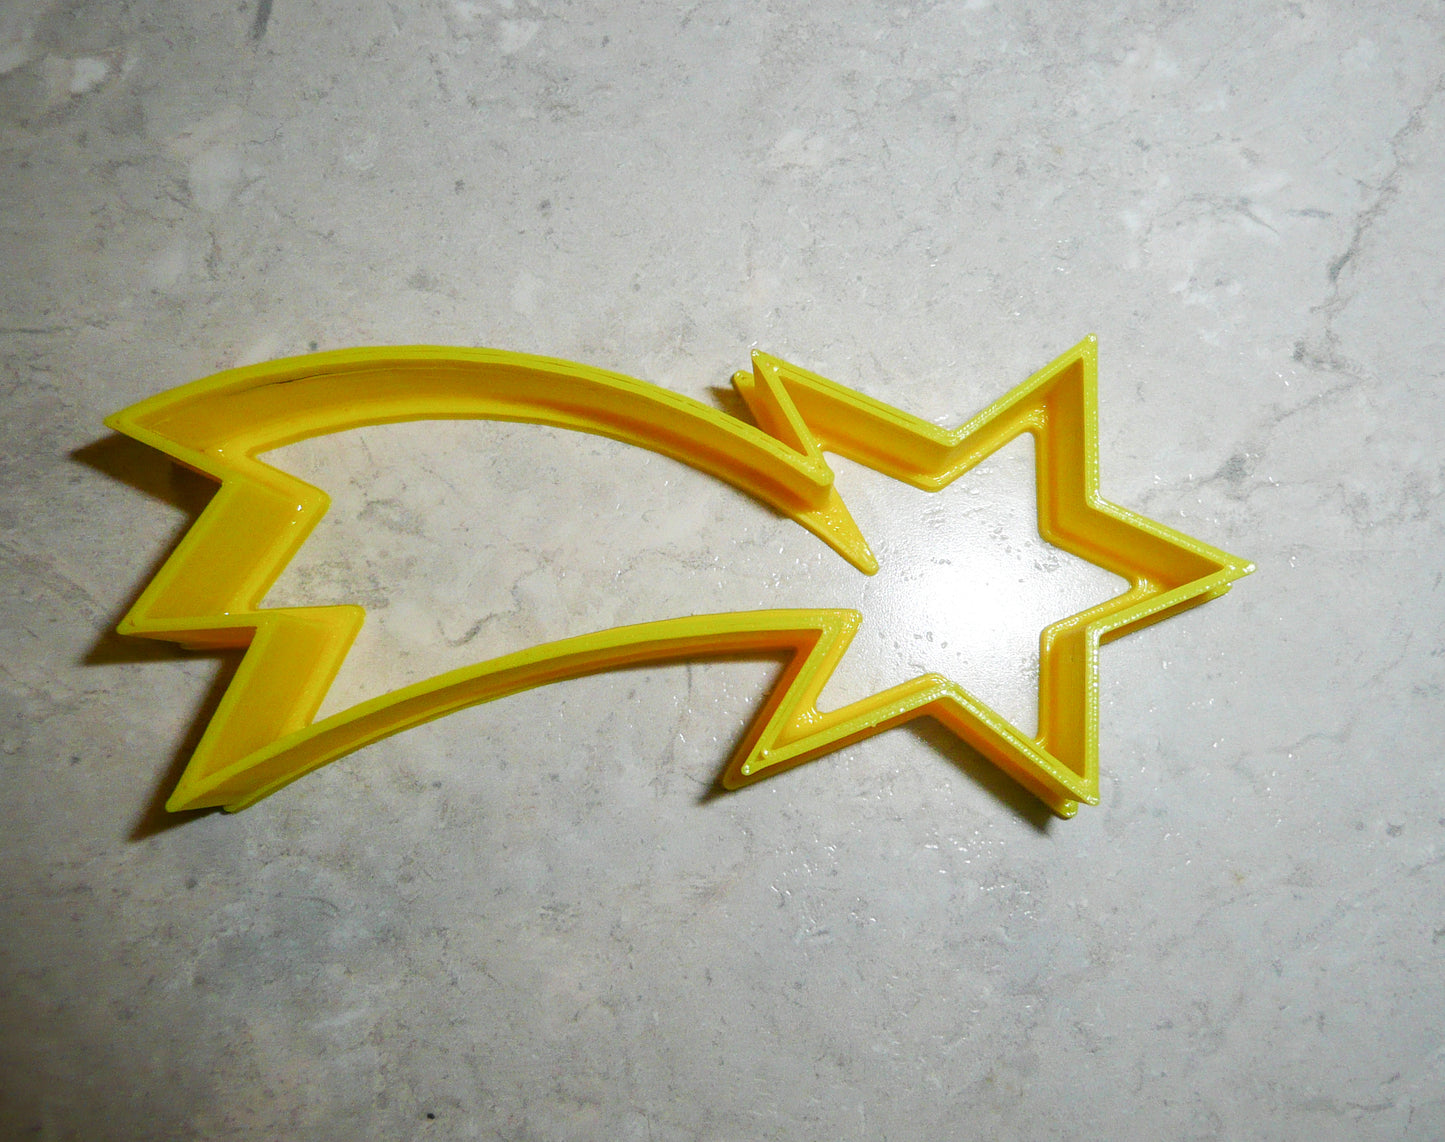 Shooting Falling Star July 4th Holiday Outline Cookie Cutter Made in USA PR407